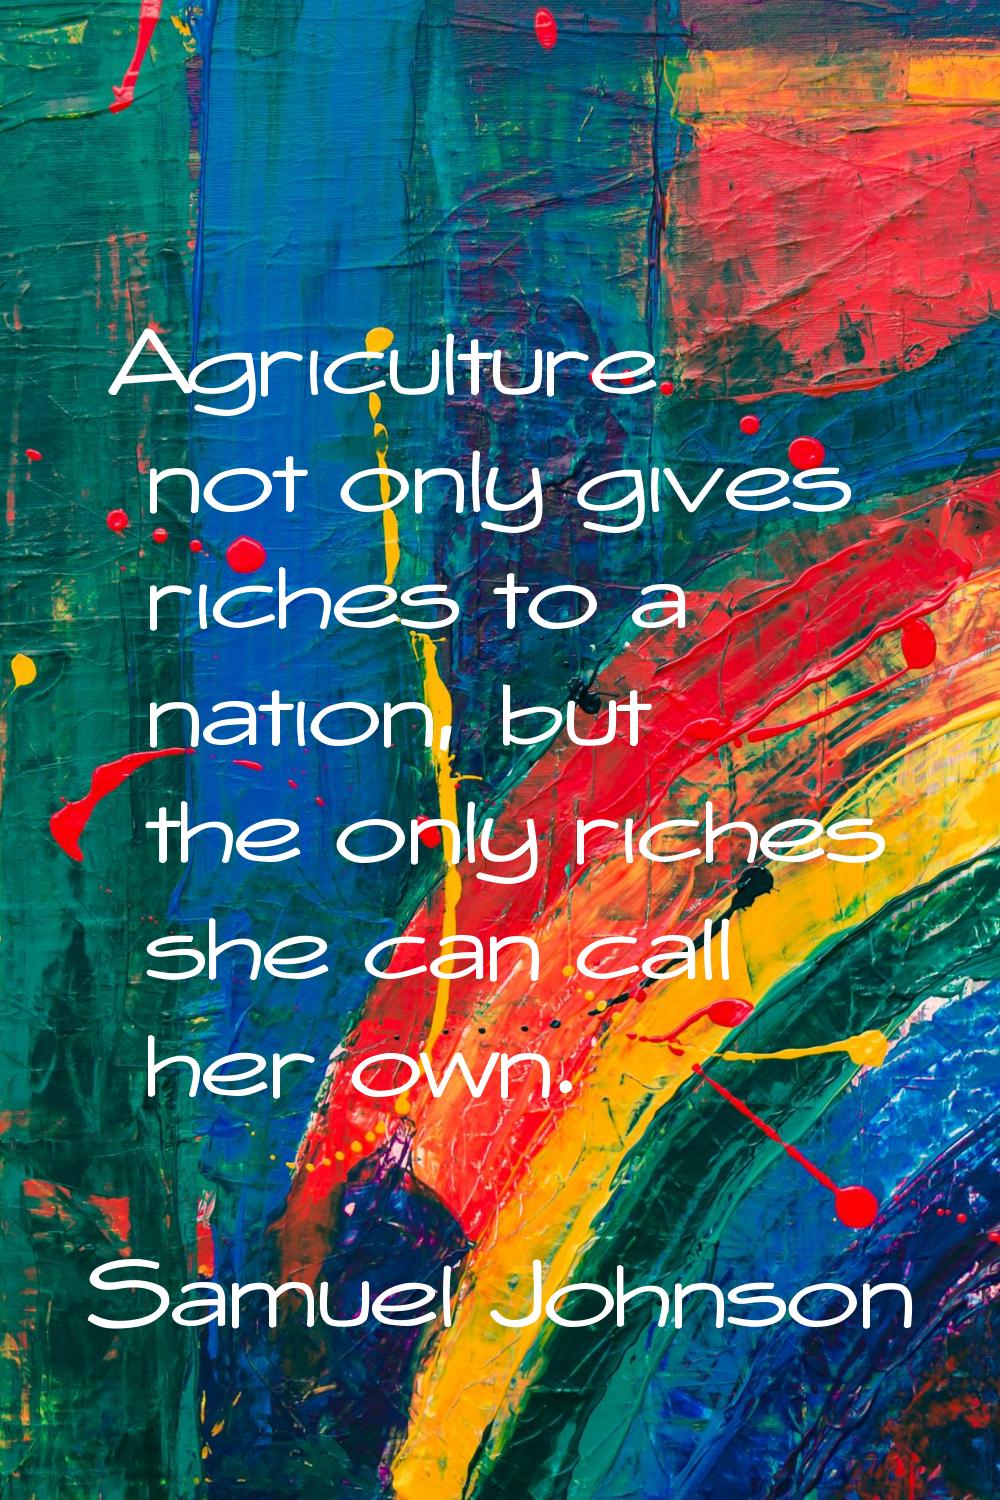 Agriculture not only gives riches to a nation, but the only riches she can call her own.